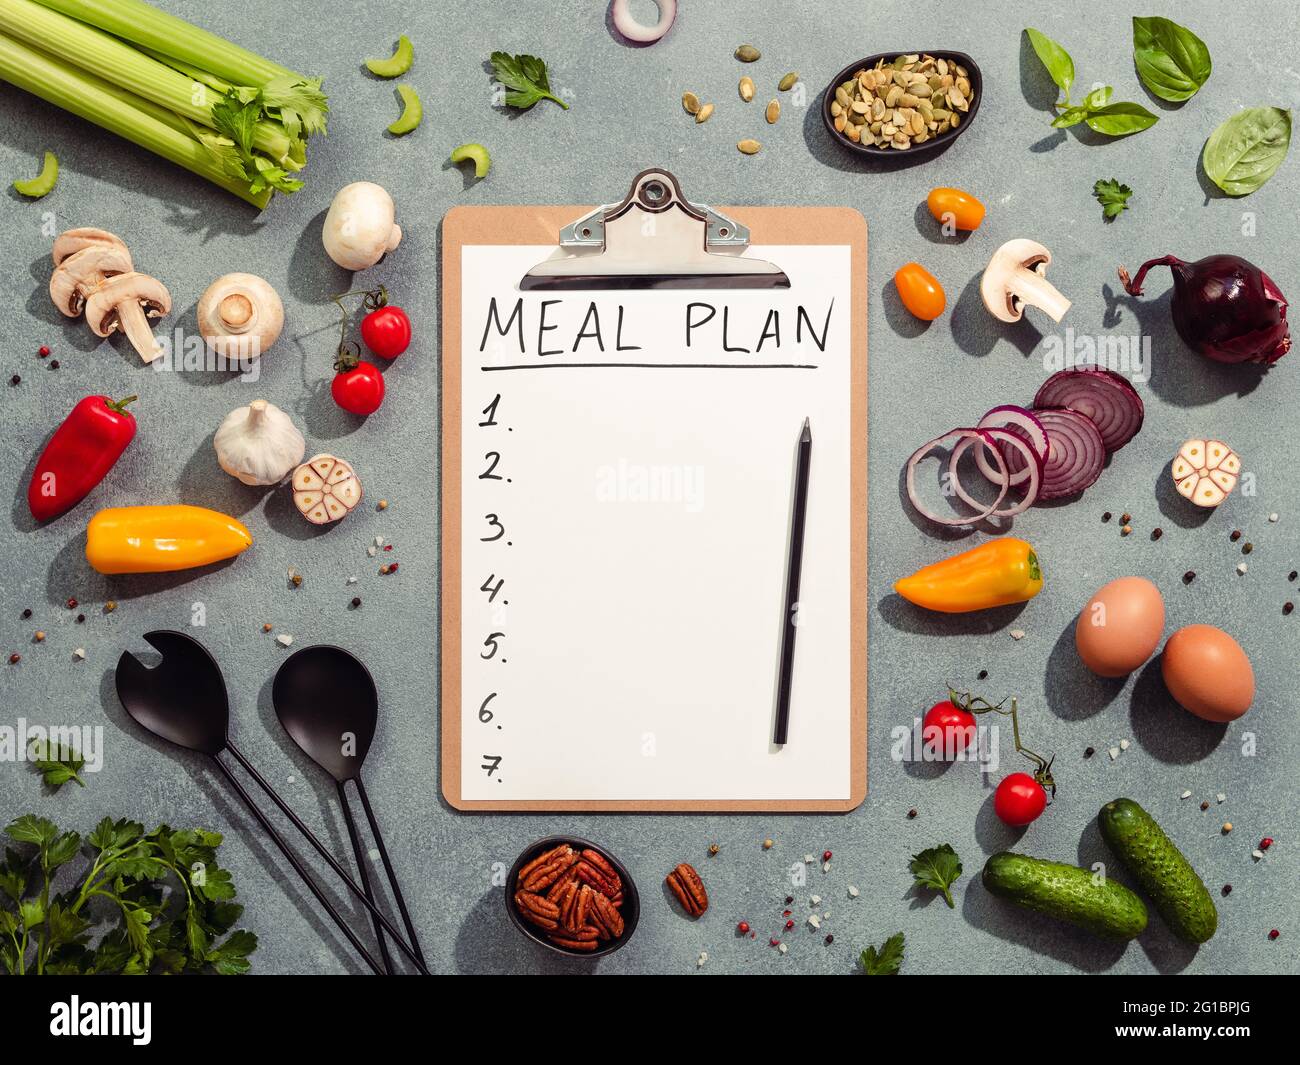 Meal plan concept. Food ingredients, salad serving utensils and clipboard with letters MEAL PLAN and seven numbers. Gray background. Diet menu concept. Top view, flat lay Stock Photo